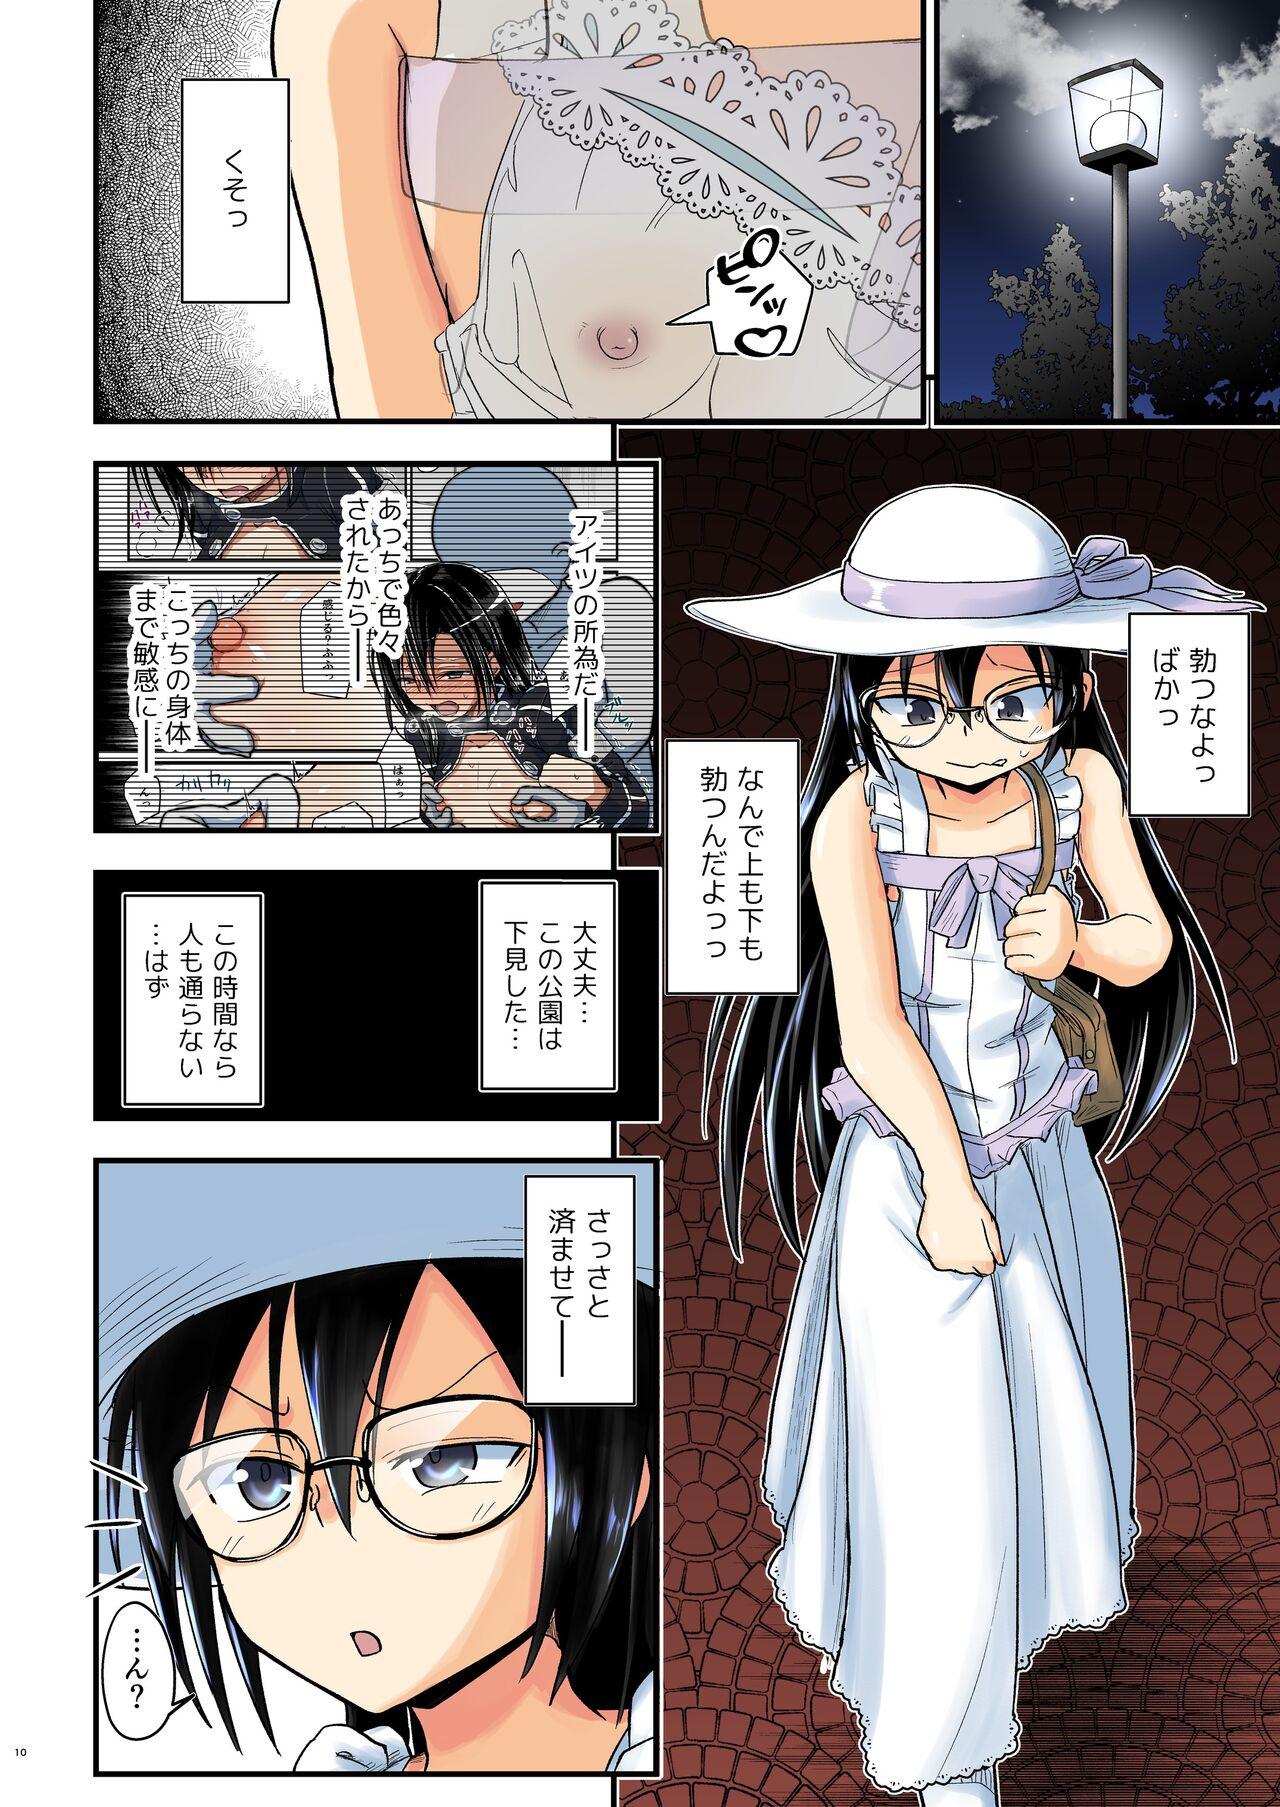 Rico Kiriko Route Another #07 - Sword art online Butt Fuck - Page 10